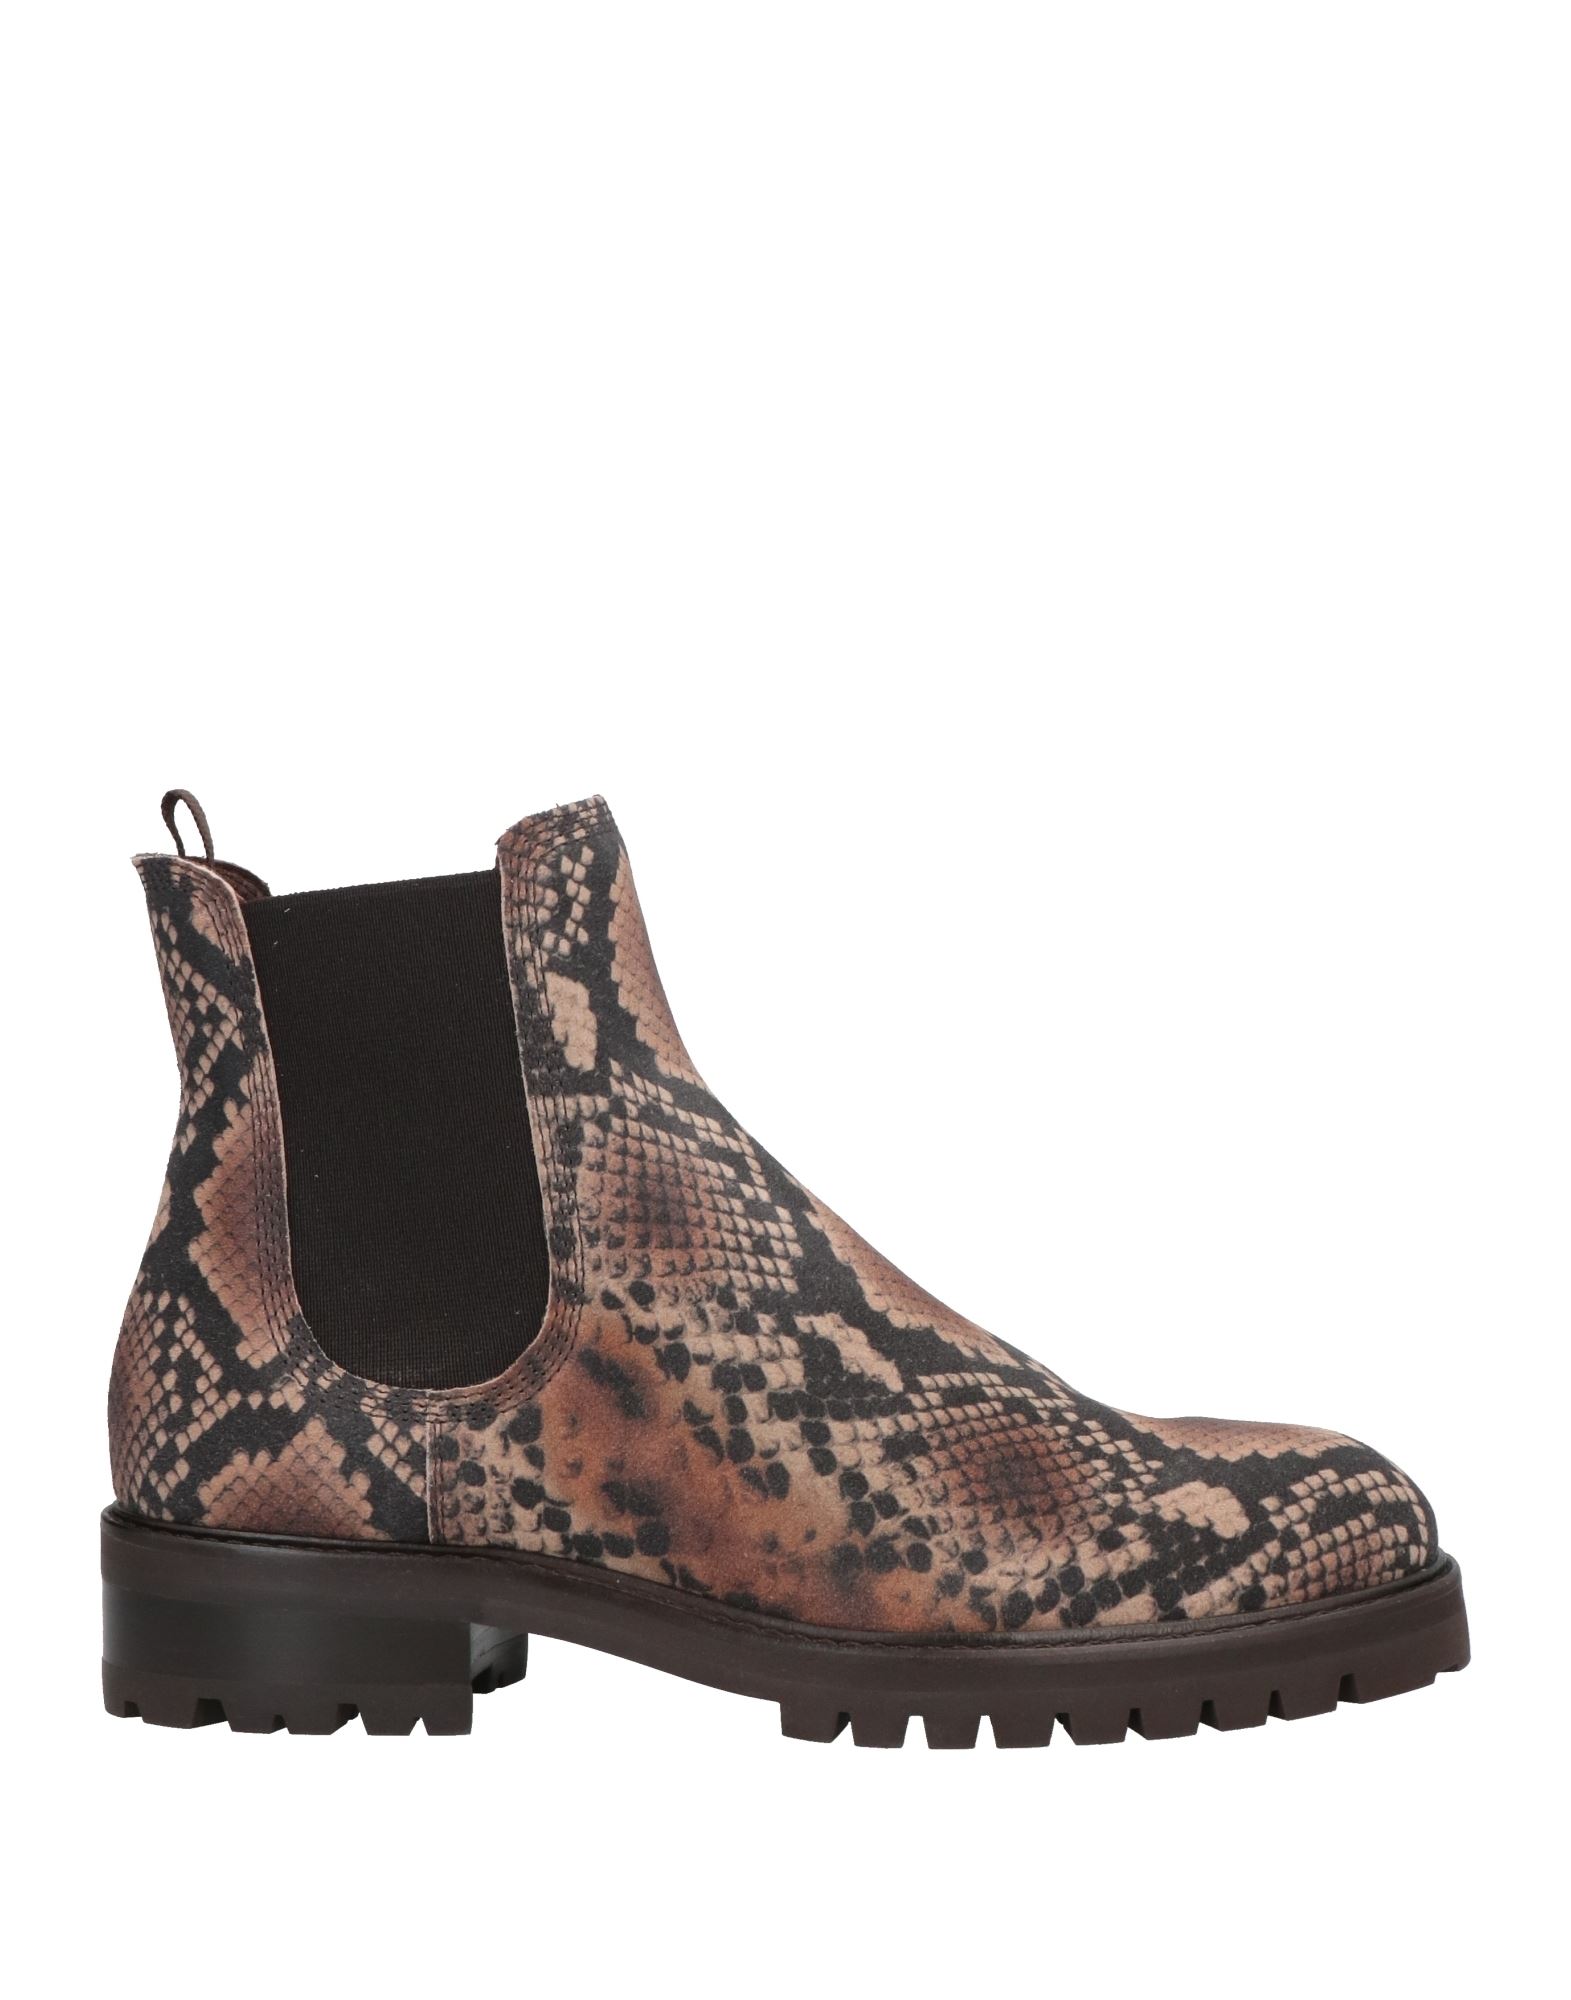 PEDRO GARCIA ANKLE BOOTS